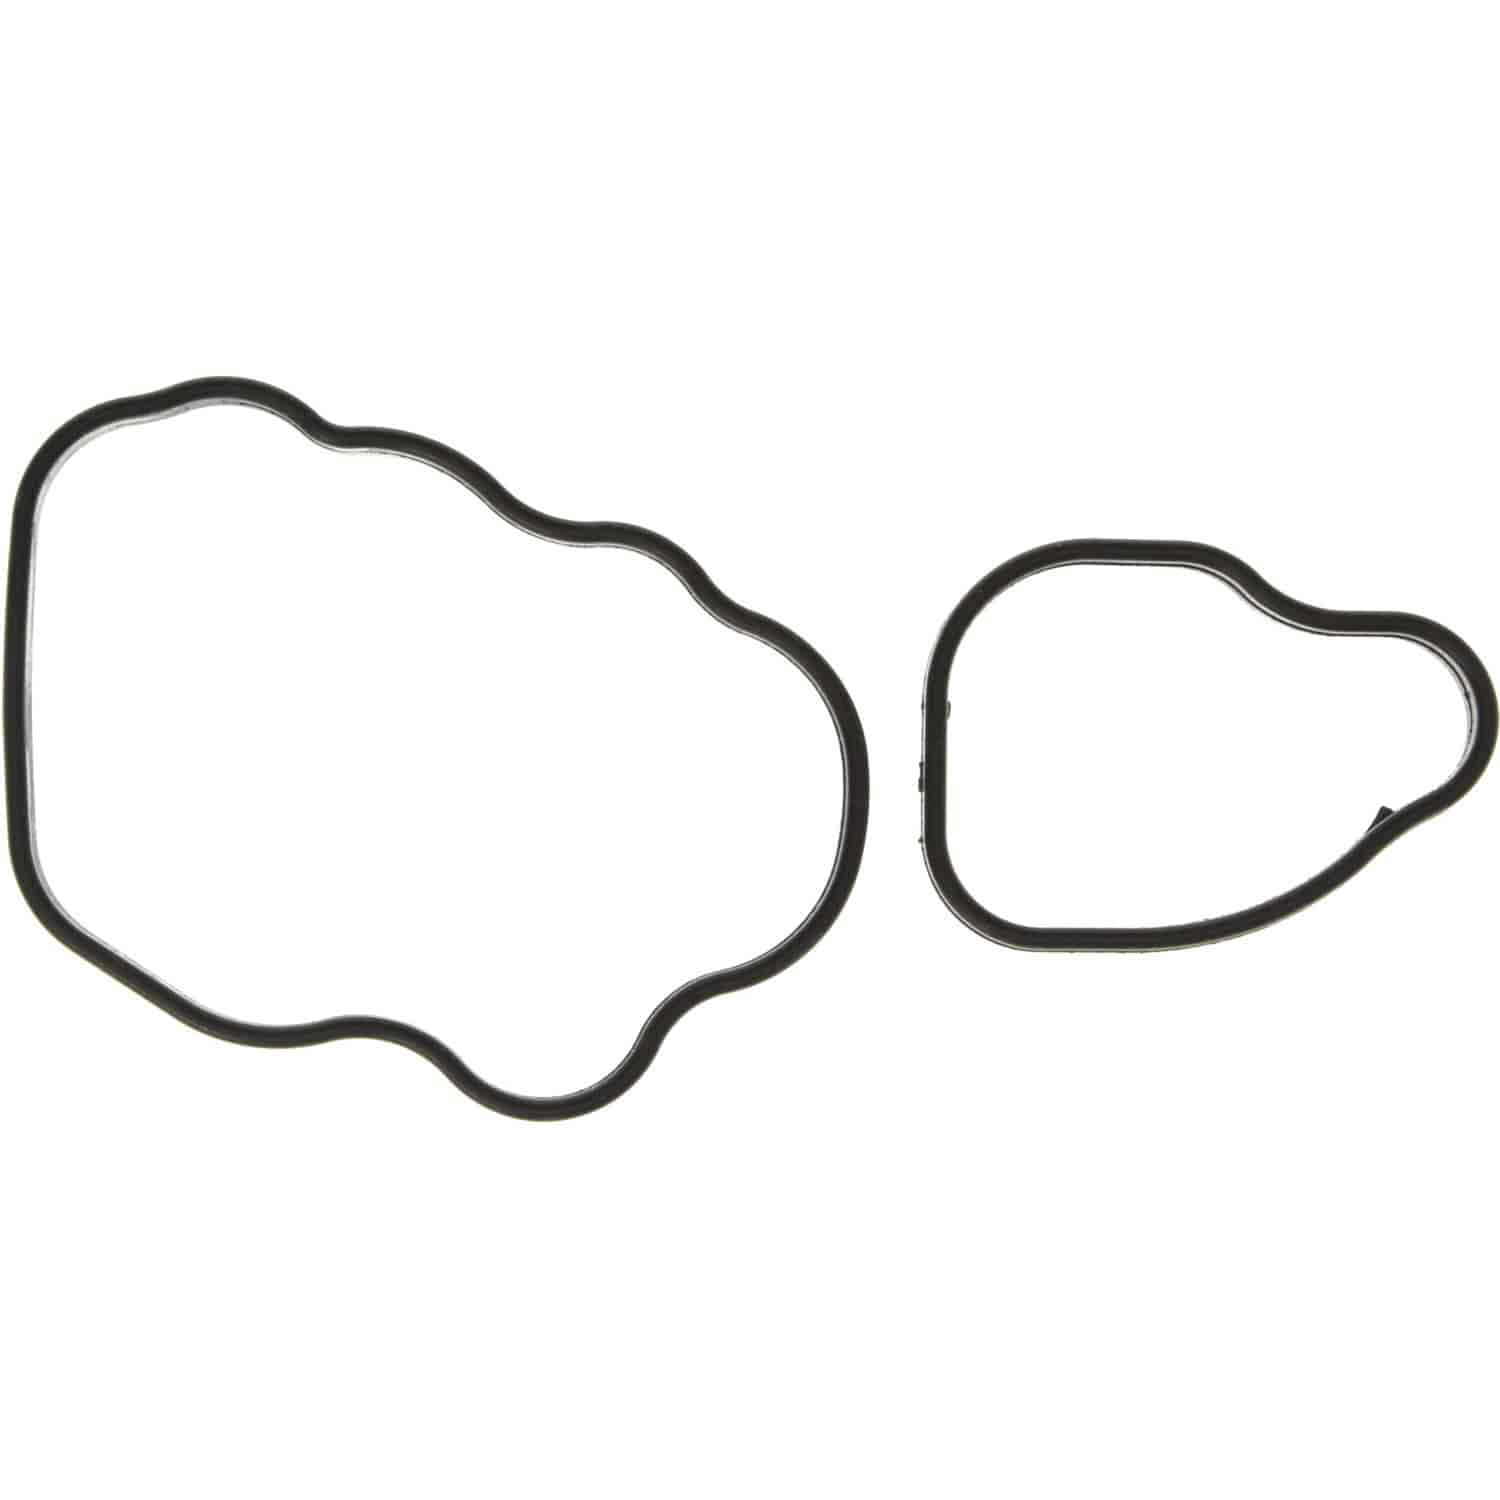 Water Coolant Crossover Gasket Set 1999-2014 Ford Modular